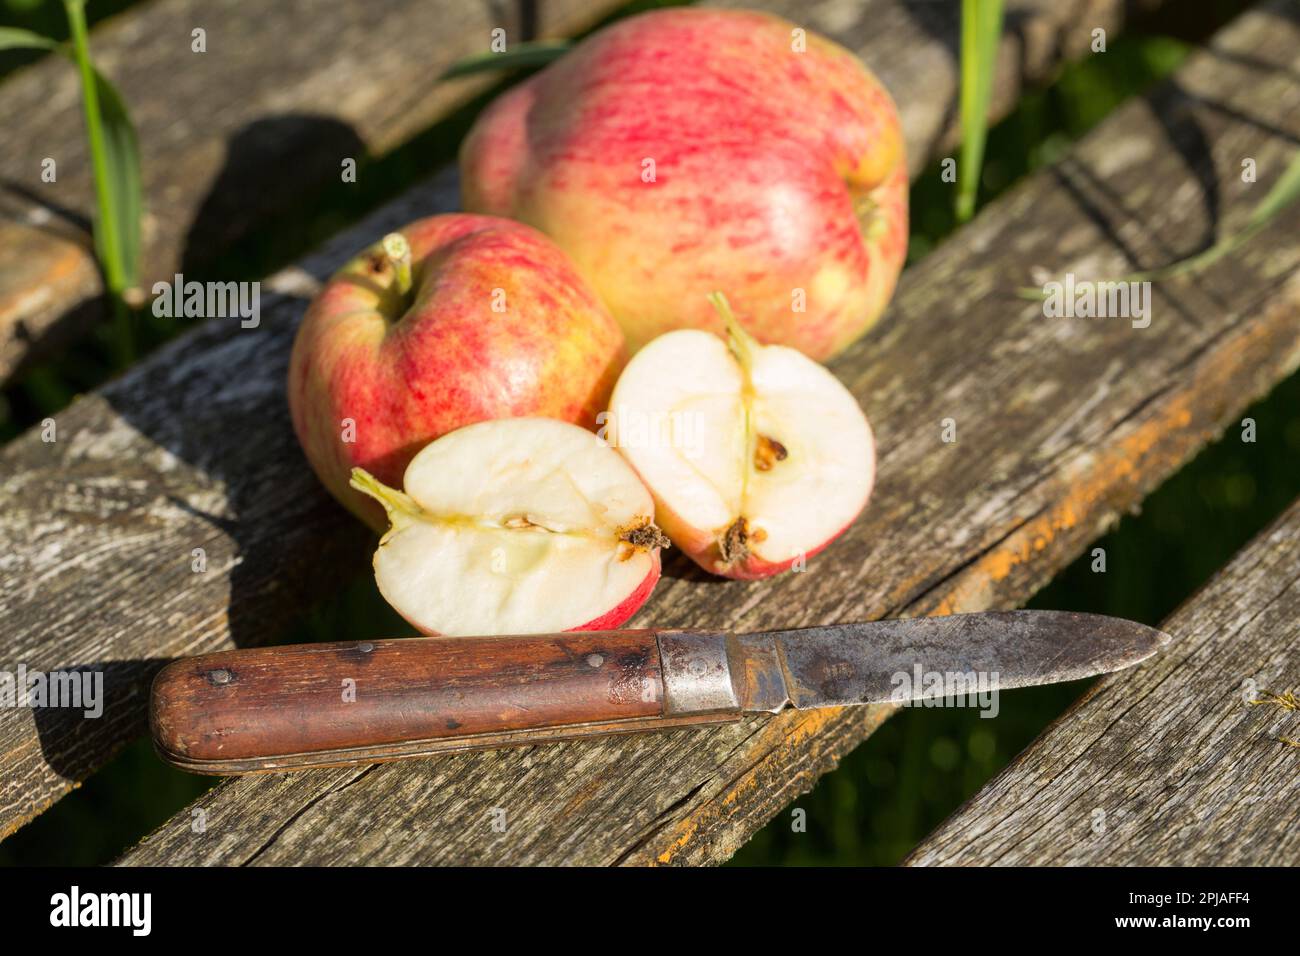 Windfall apples from an old orchard next to an old penknife resting on a wooden bench. Lancashire England UK GB Stock Photo